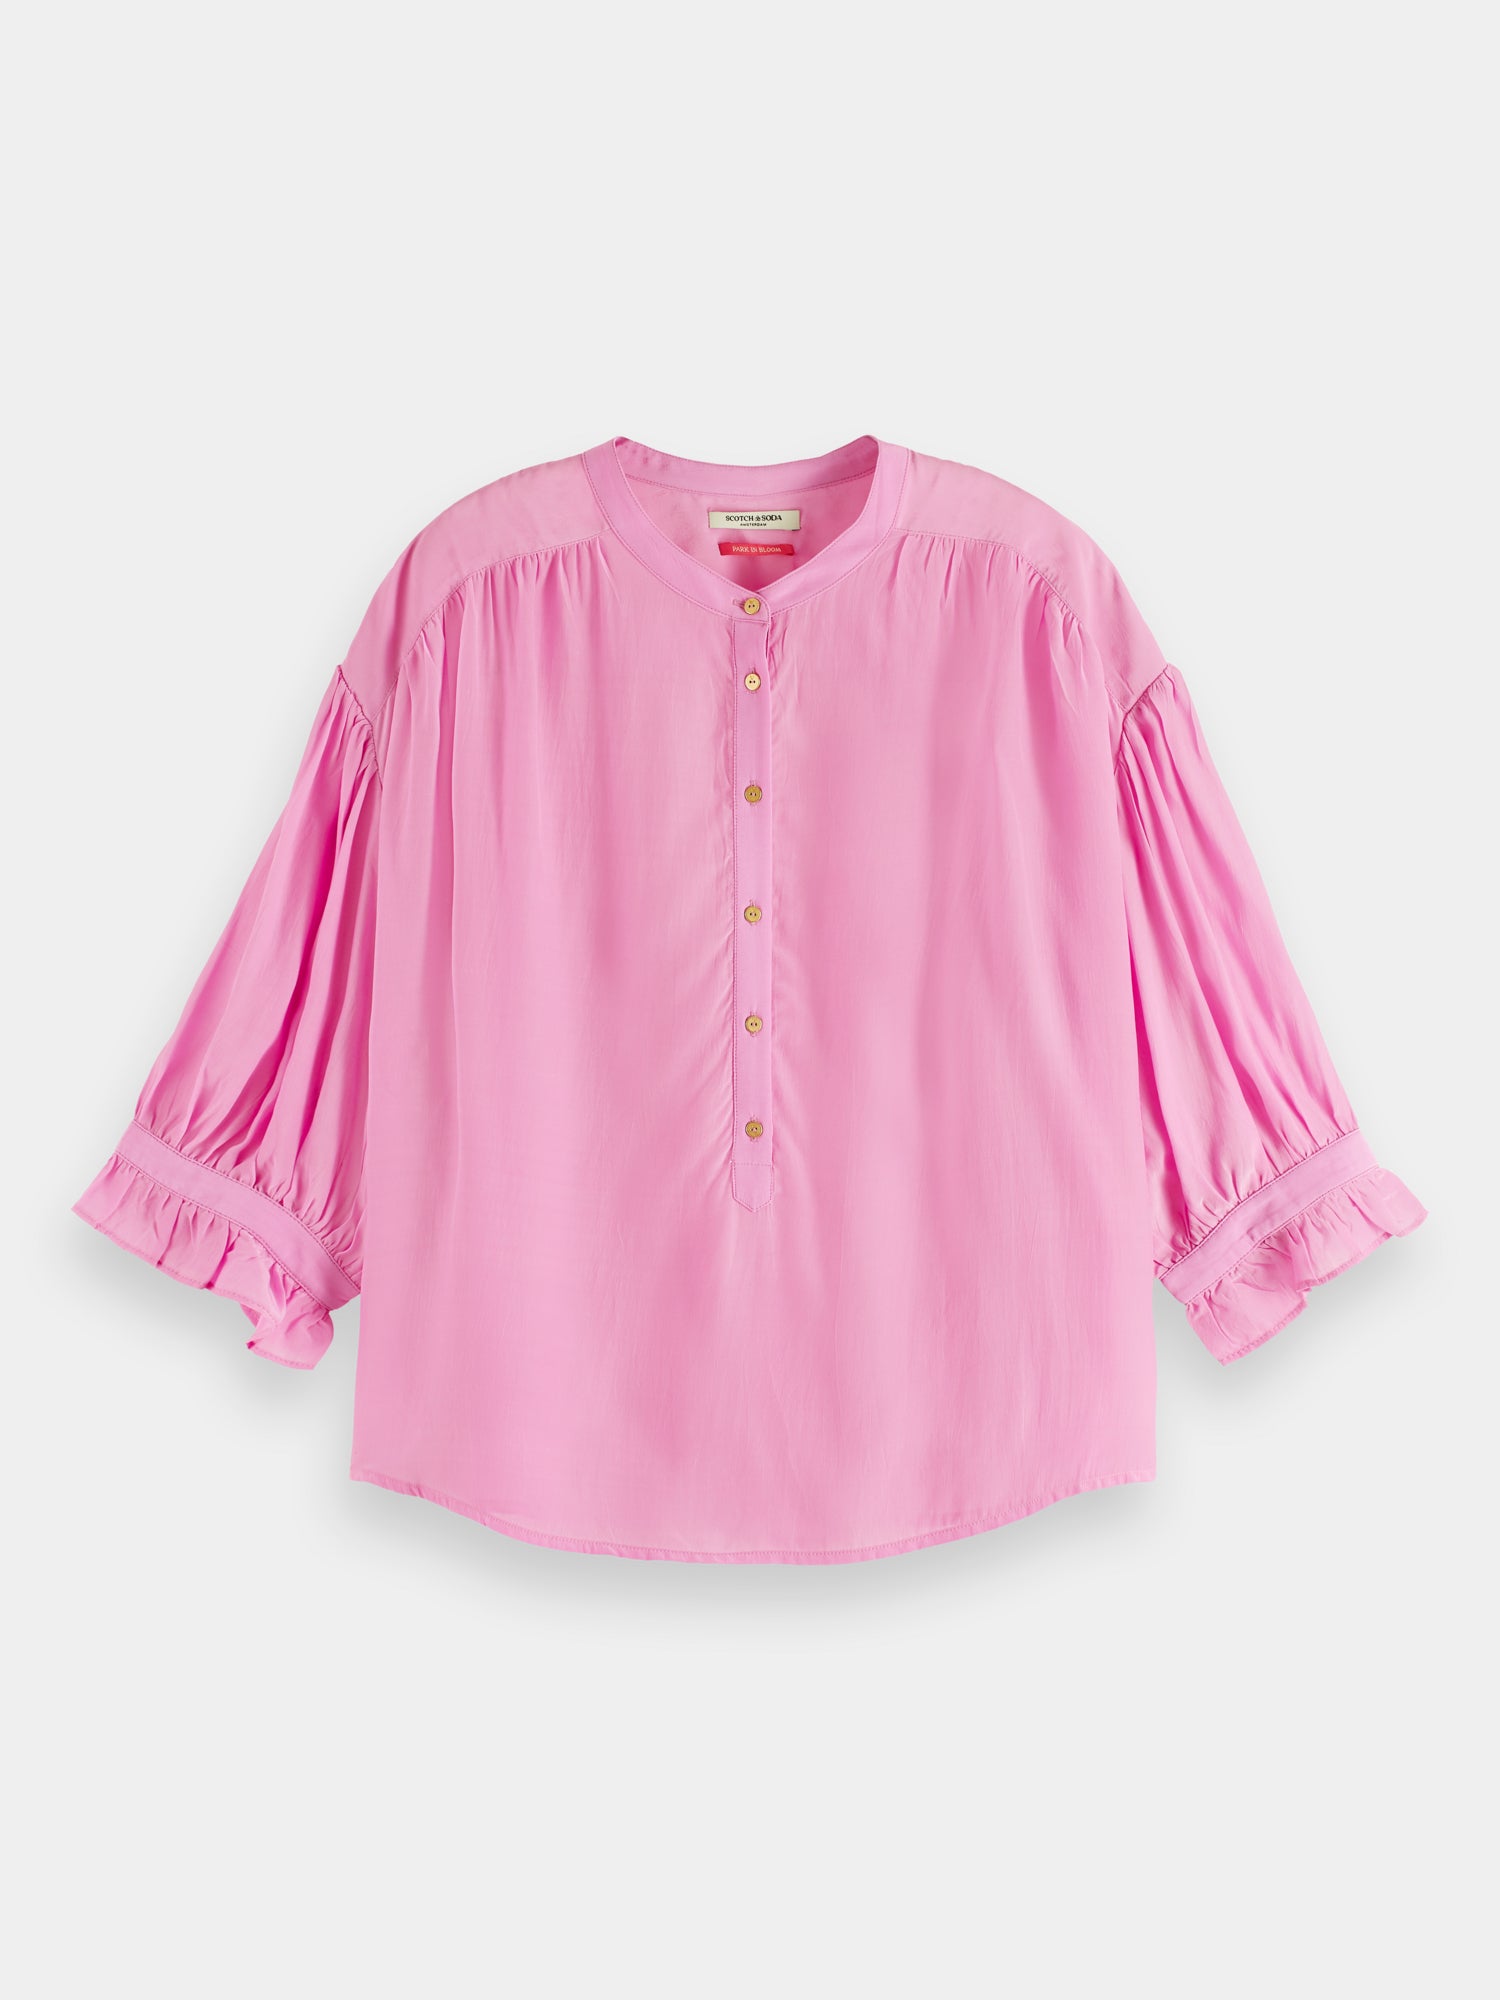 Elbow sleeve easy popover top - Orchid Pink